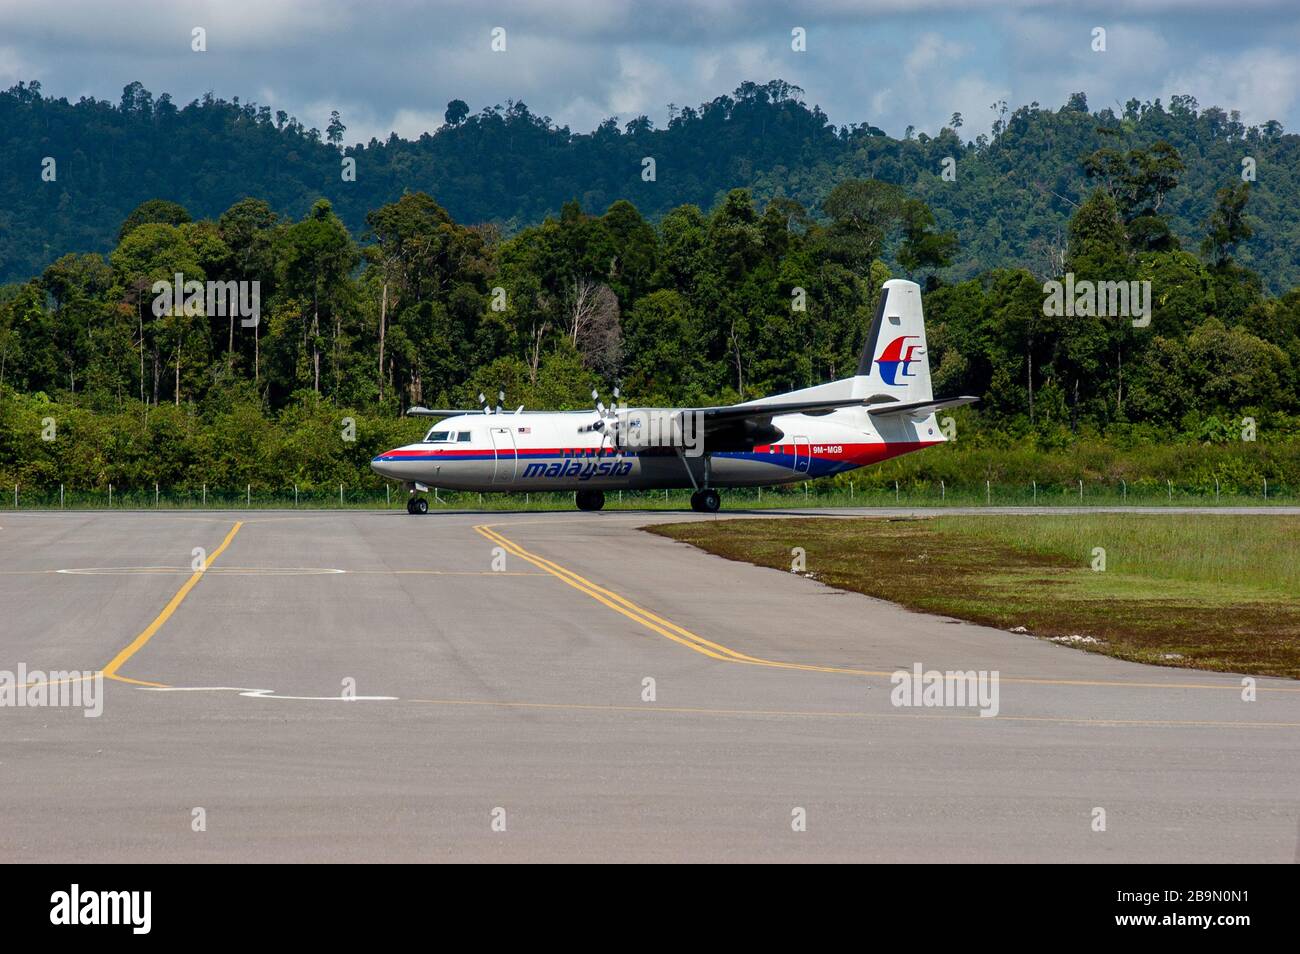 Malaysia Airlines Fokker 50 prop driven aircraft landing at Mulu, Sarawak in the rainforest of Borneo. Stock Photo